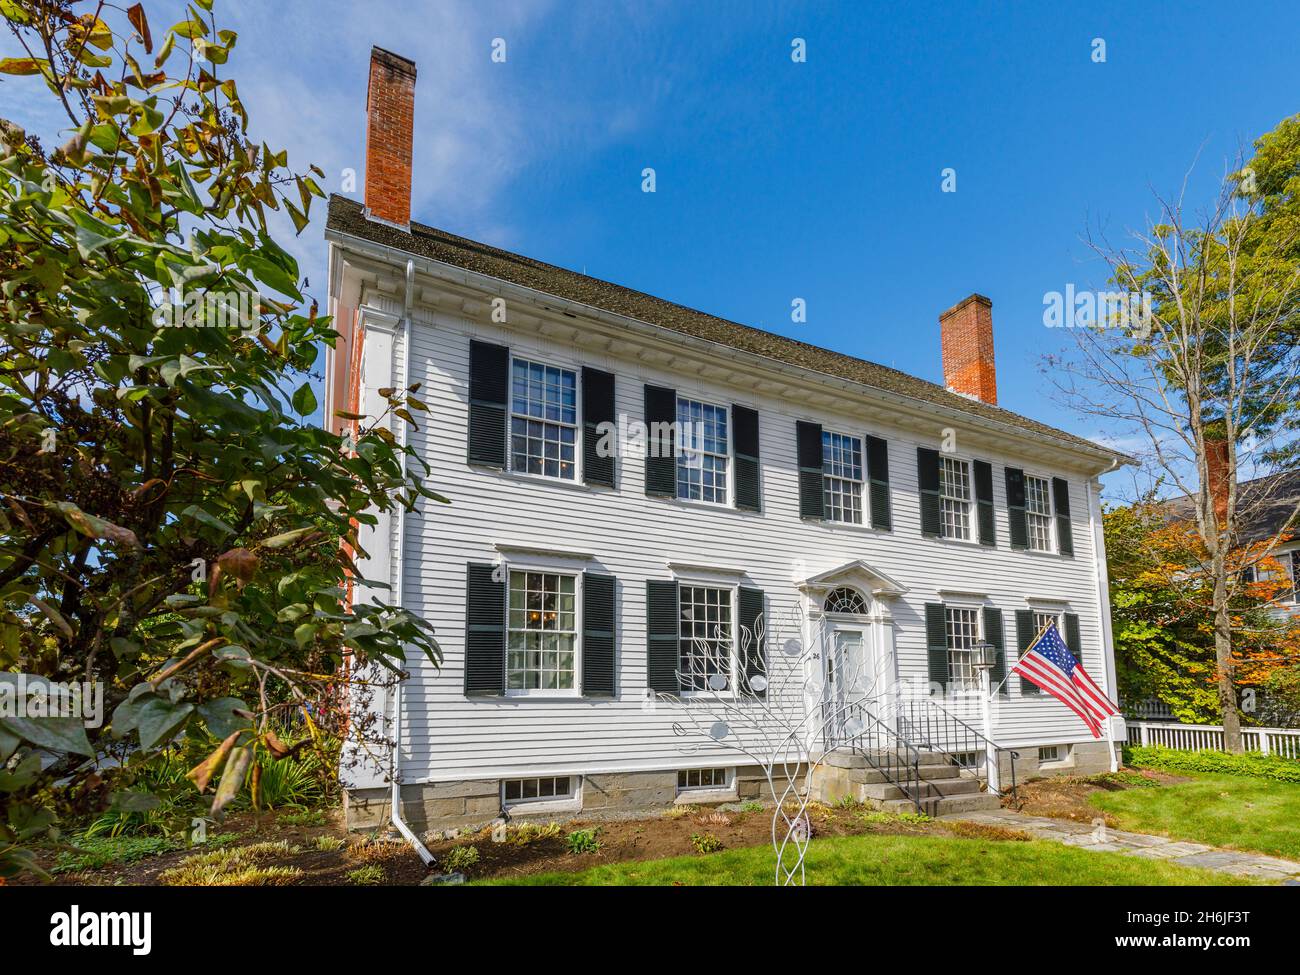 Typical local style white clapboard faced house with patriotic American flag in Woodstock, Vermont, New England, USA Stock Photo